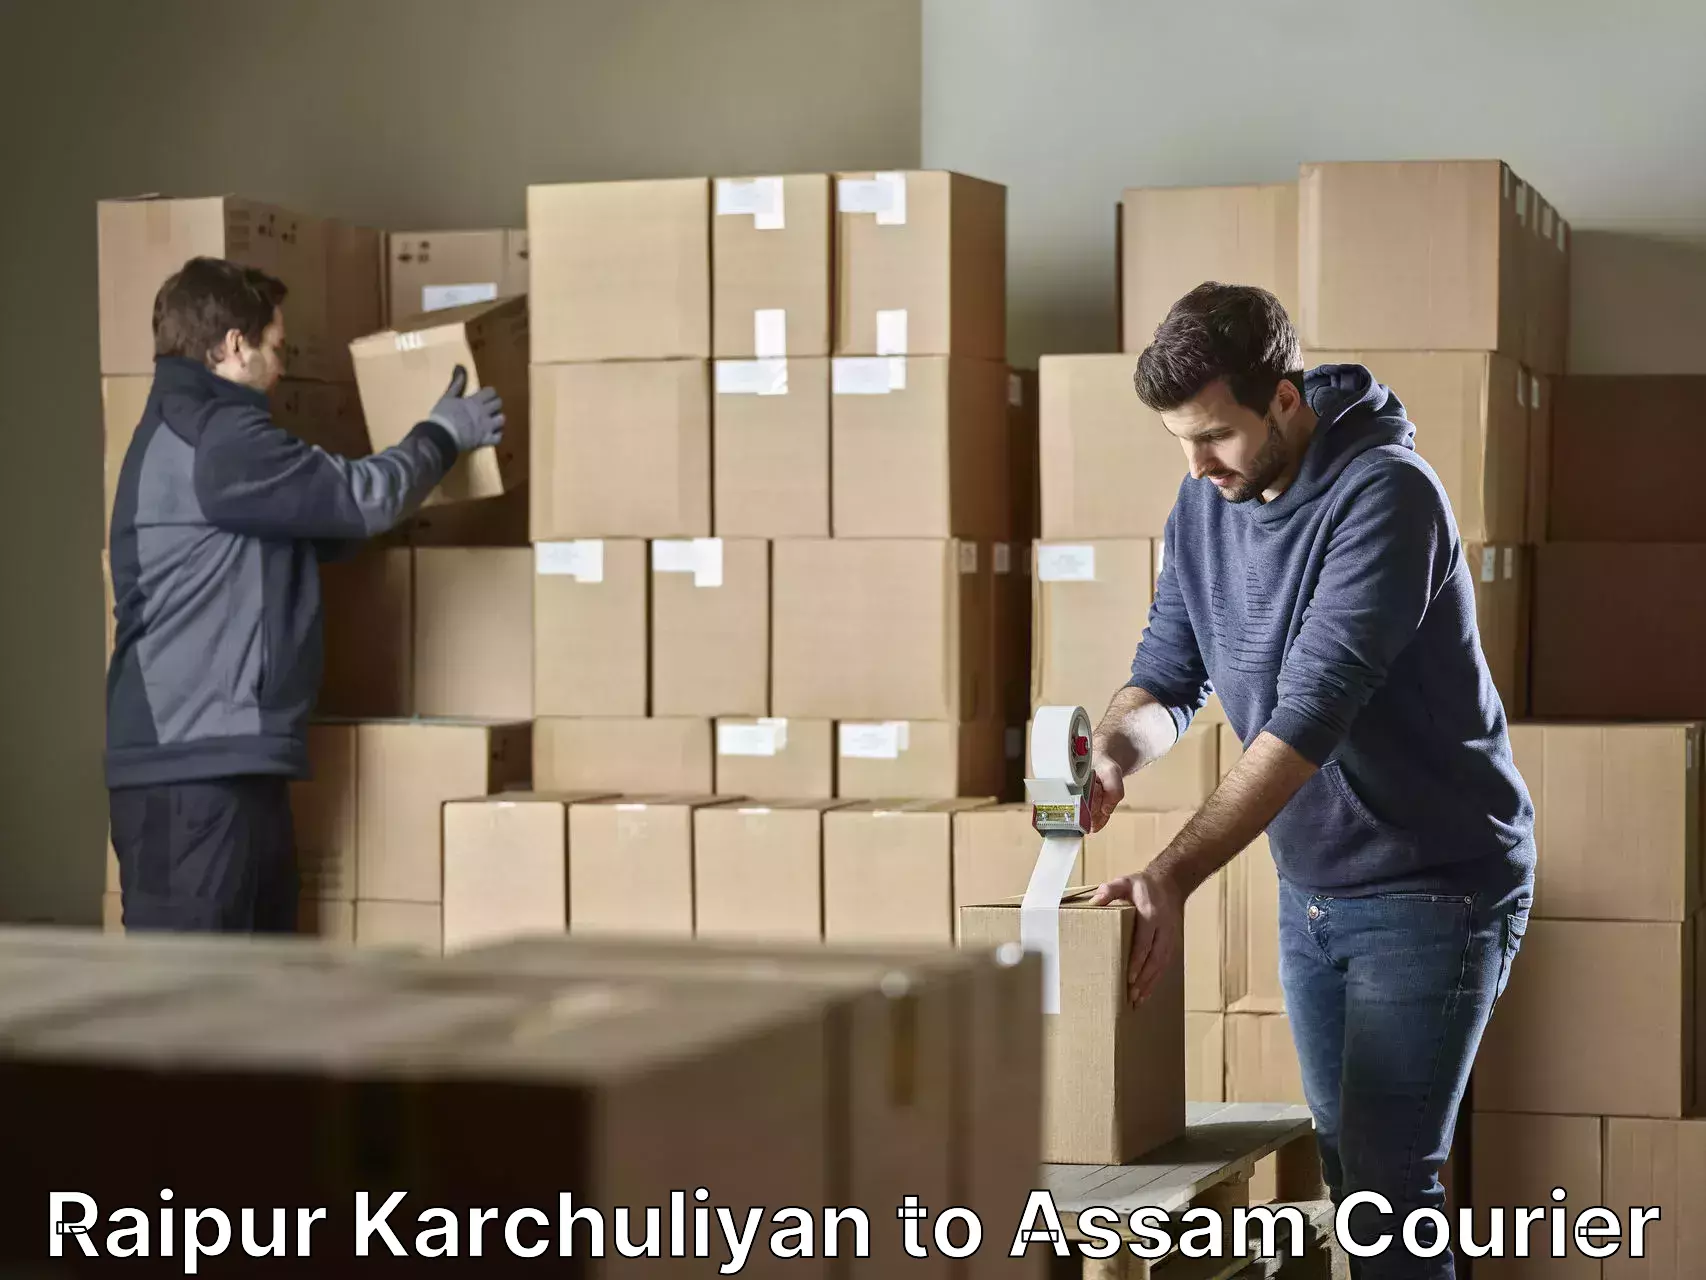 Budget-friendly movers Raipur Karchuliyan to Assam